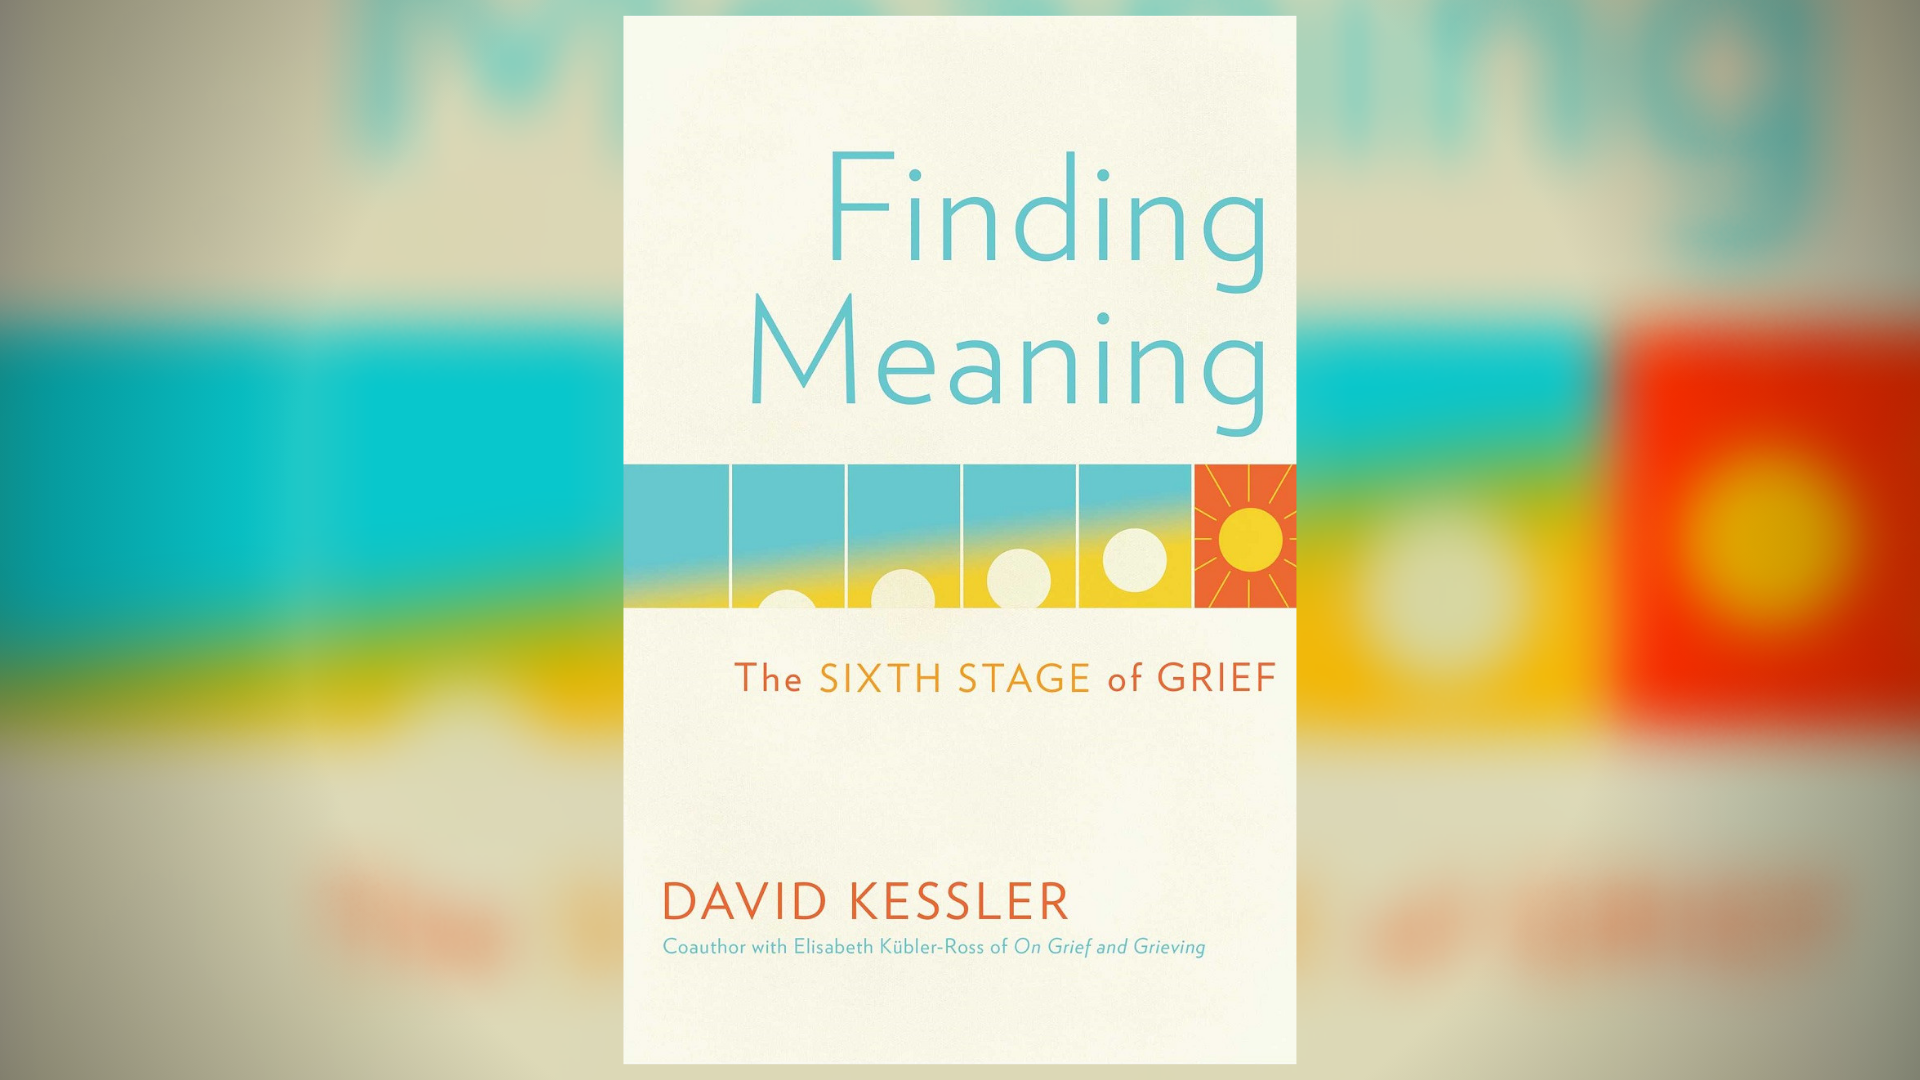 Healing and loss expert David Kessler shares powerful tools to help people experiencing loss transform grief into a more peaceful and hopeful experience.